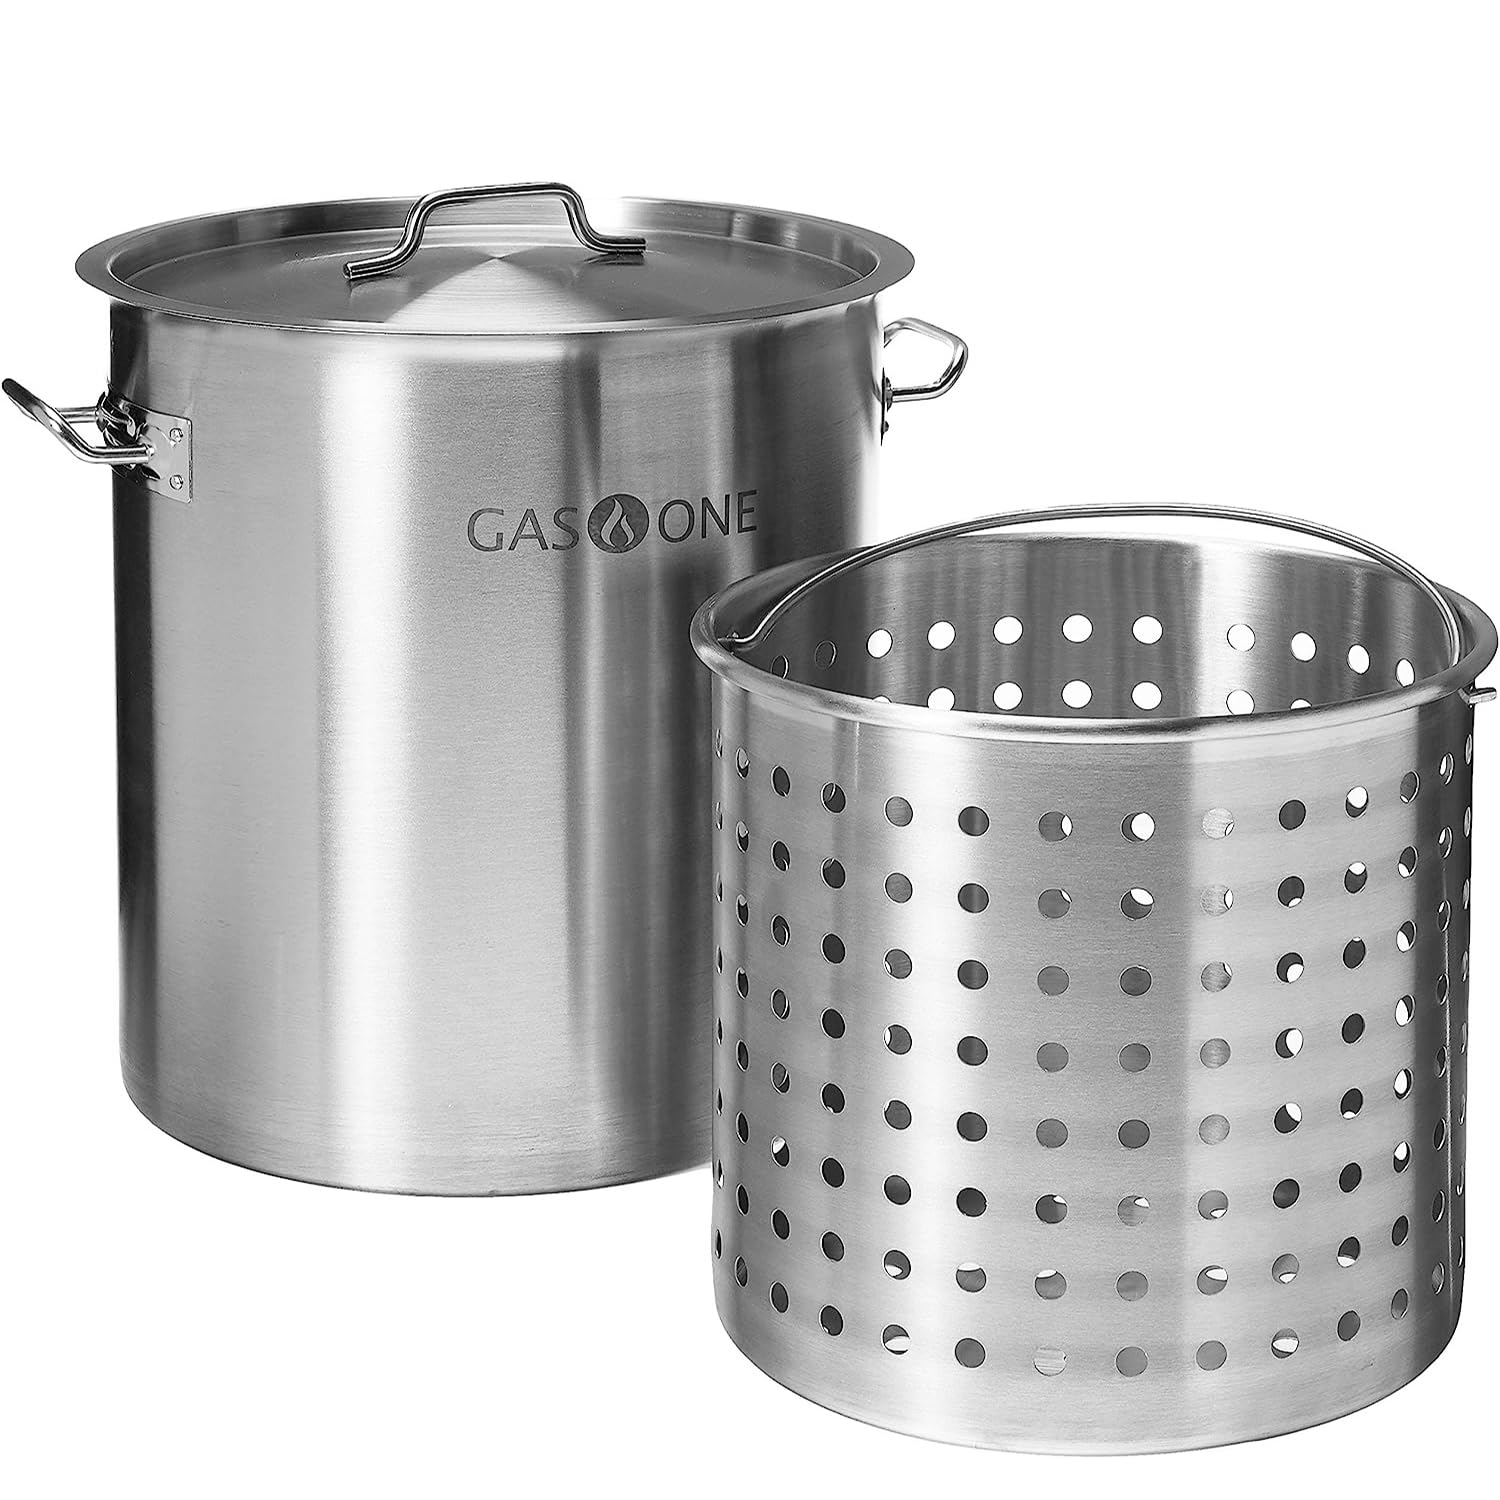 GasOne Stainless Steel Stockpot with Basket – 53qt Stock Pot with Lid and Reinforced Bottom – Heavy-Duty Cooking Pot for Deep Frying, Turkey Frying, Beer Brewing, Soup, Seafood Boil – Satin Finish